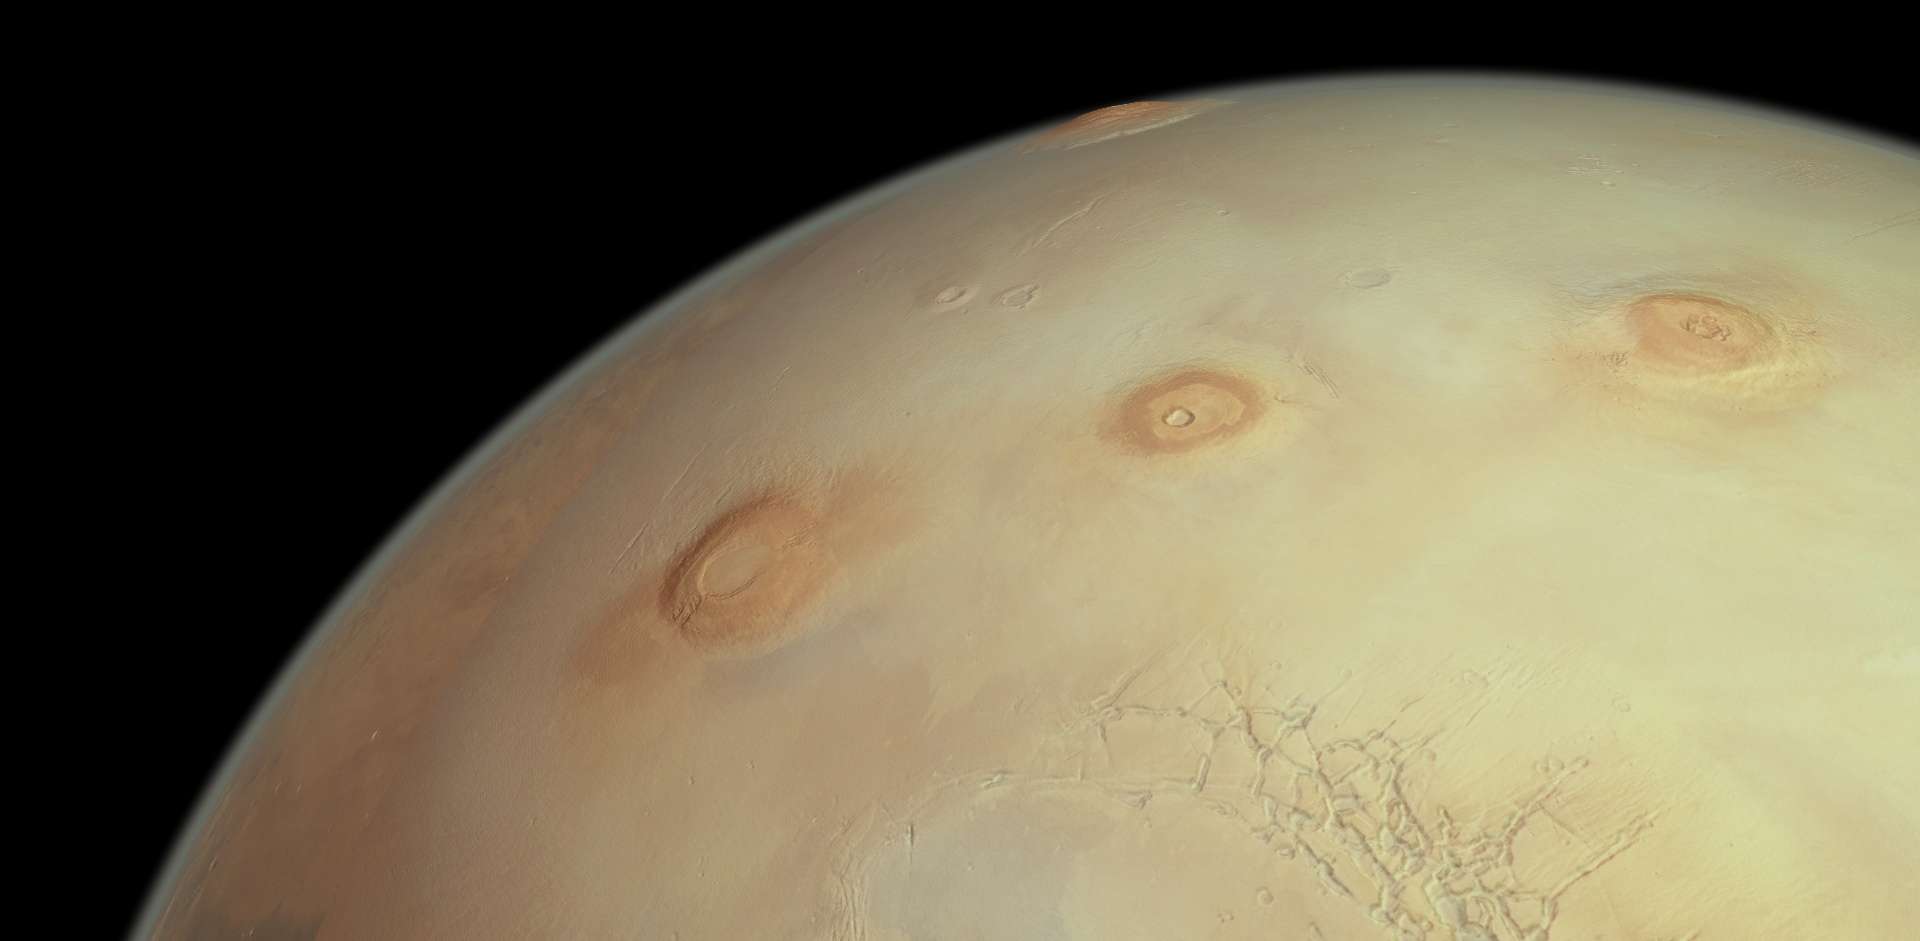 A stunning view of Mars celebrating the 25,000th orbit of the Mars Express probe